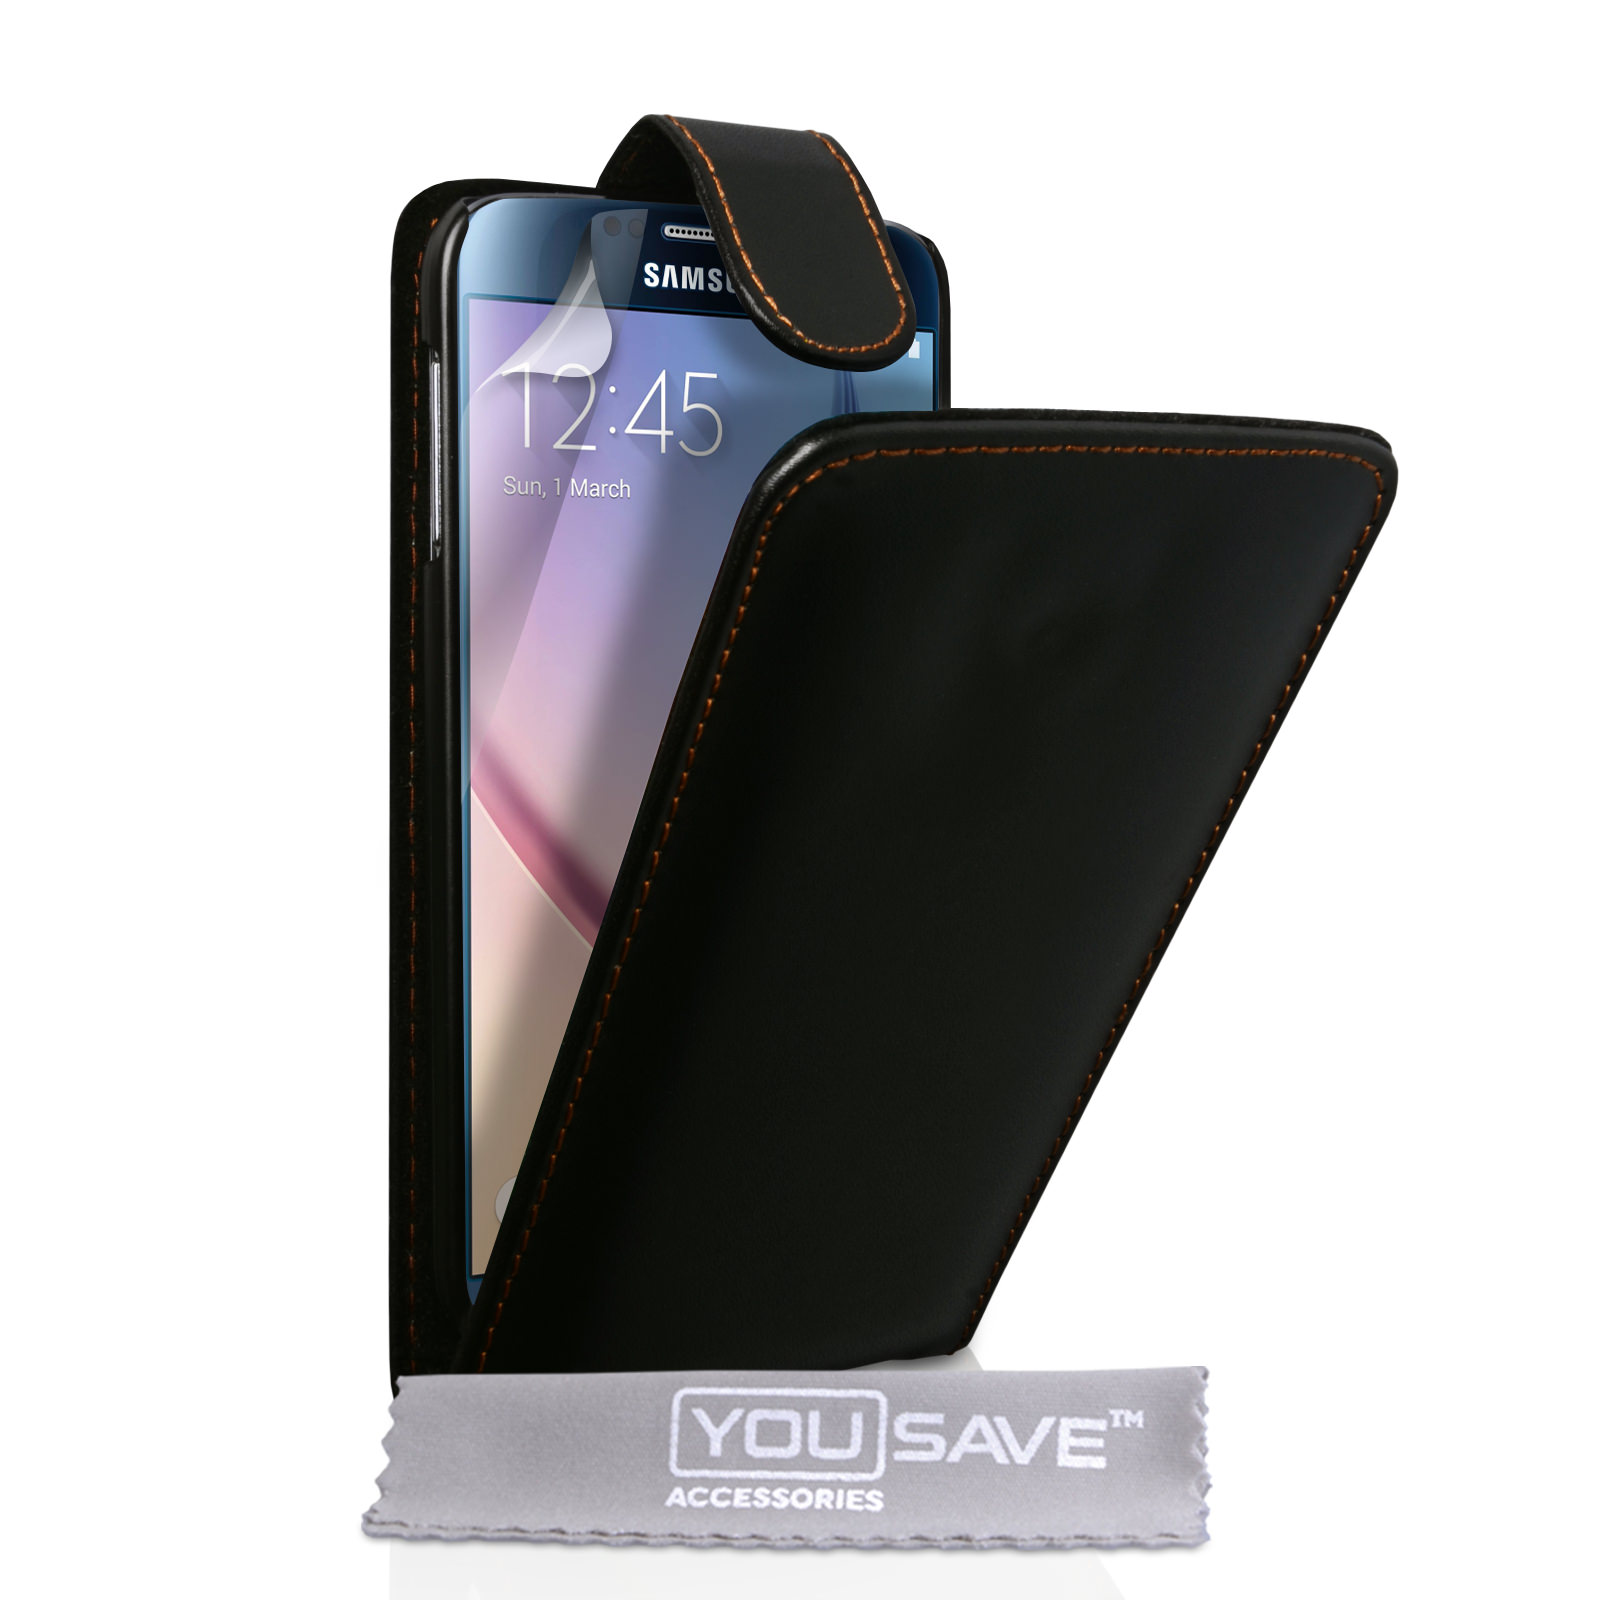 YouSave Accessories Samsung Galaxy S6 Leather-Effect Flip Case - Black